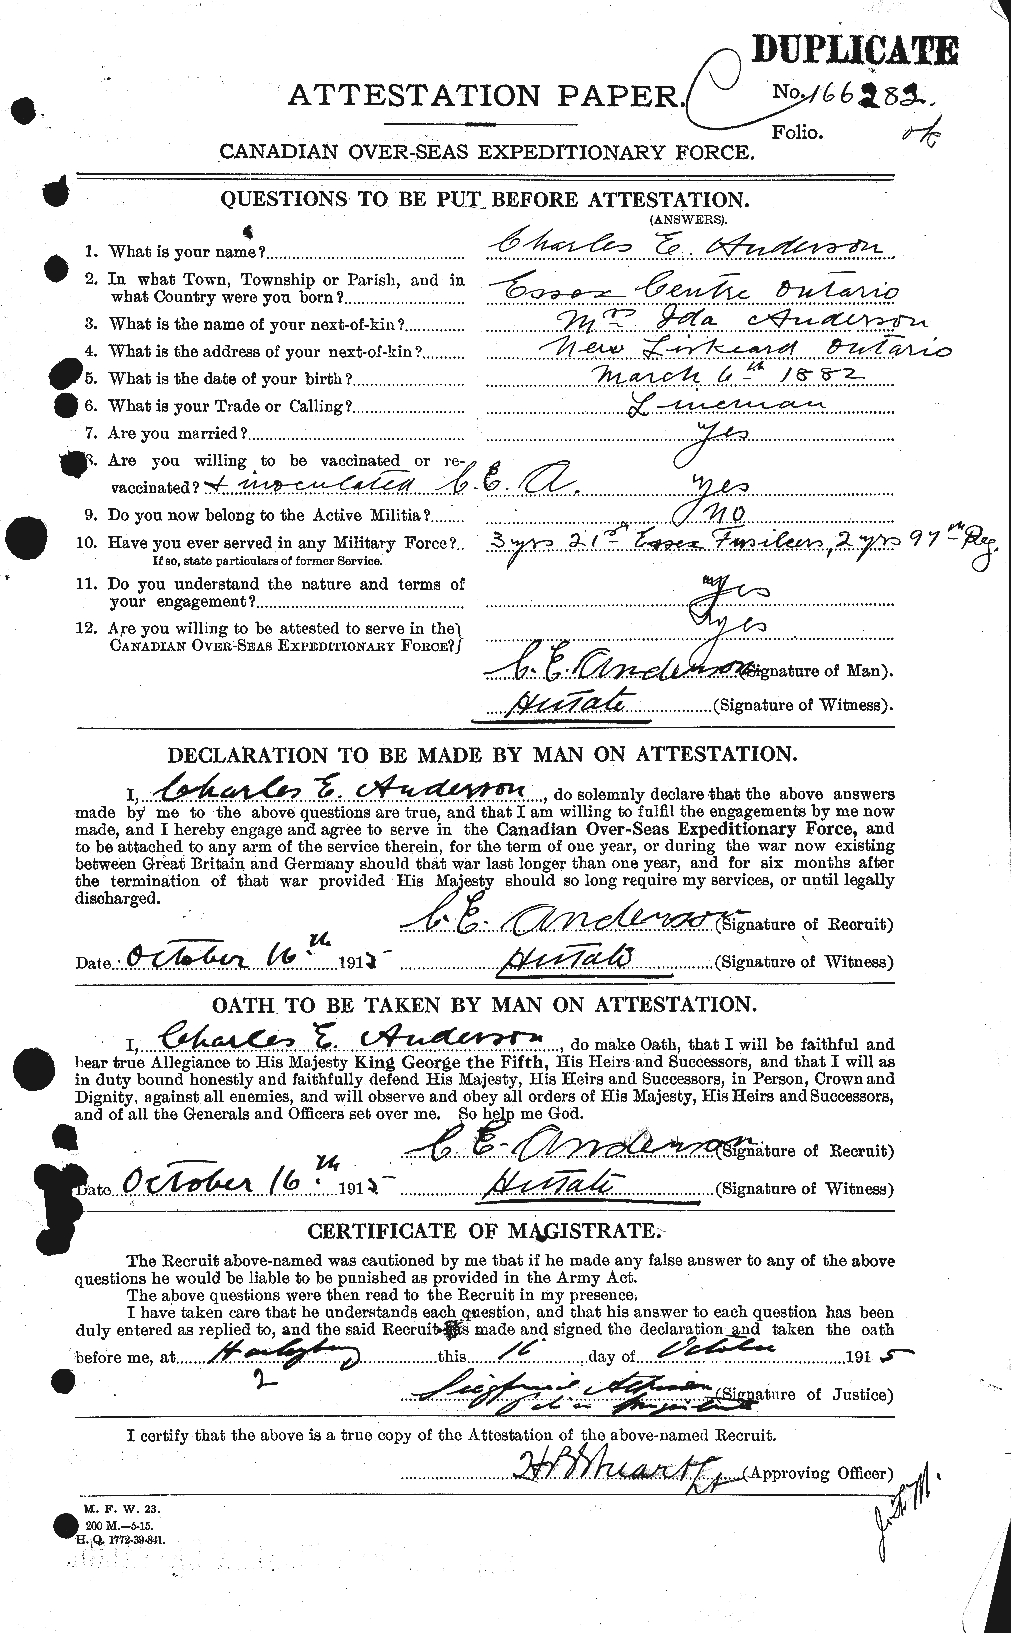 Personnel Records of the First World War - CEF 209244a